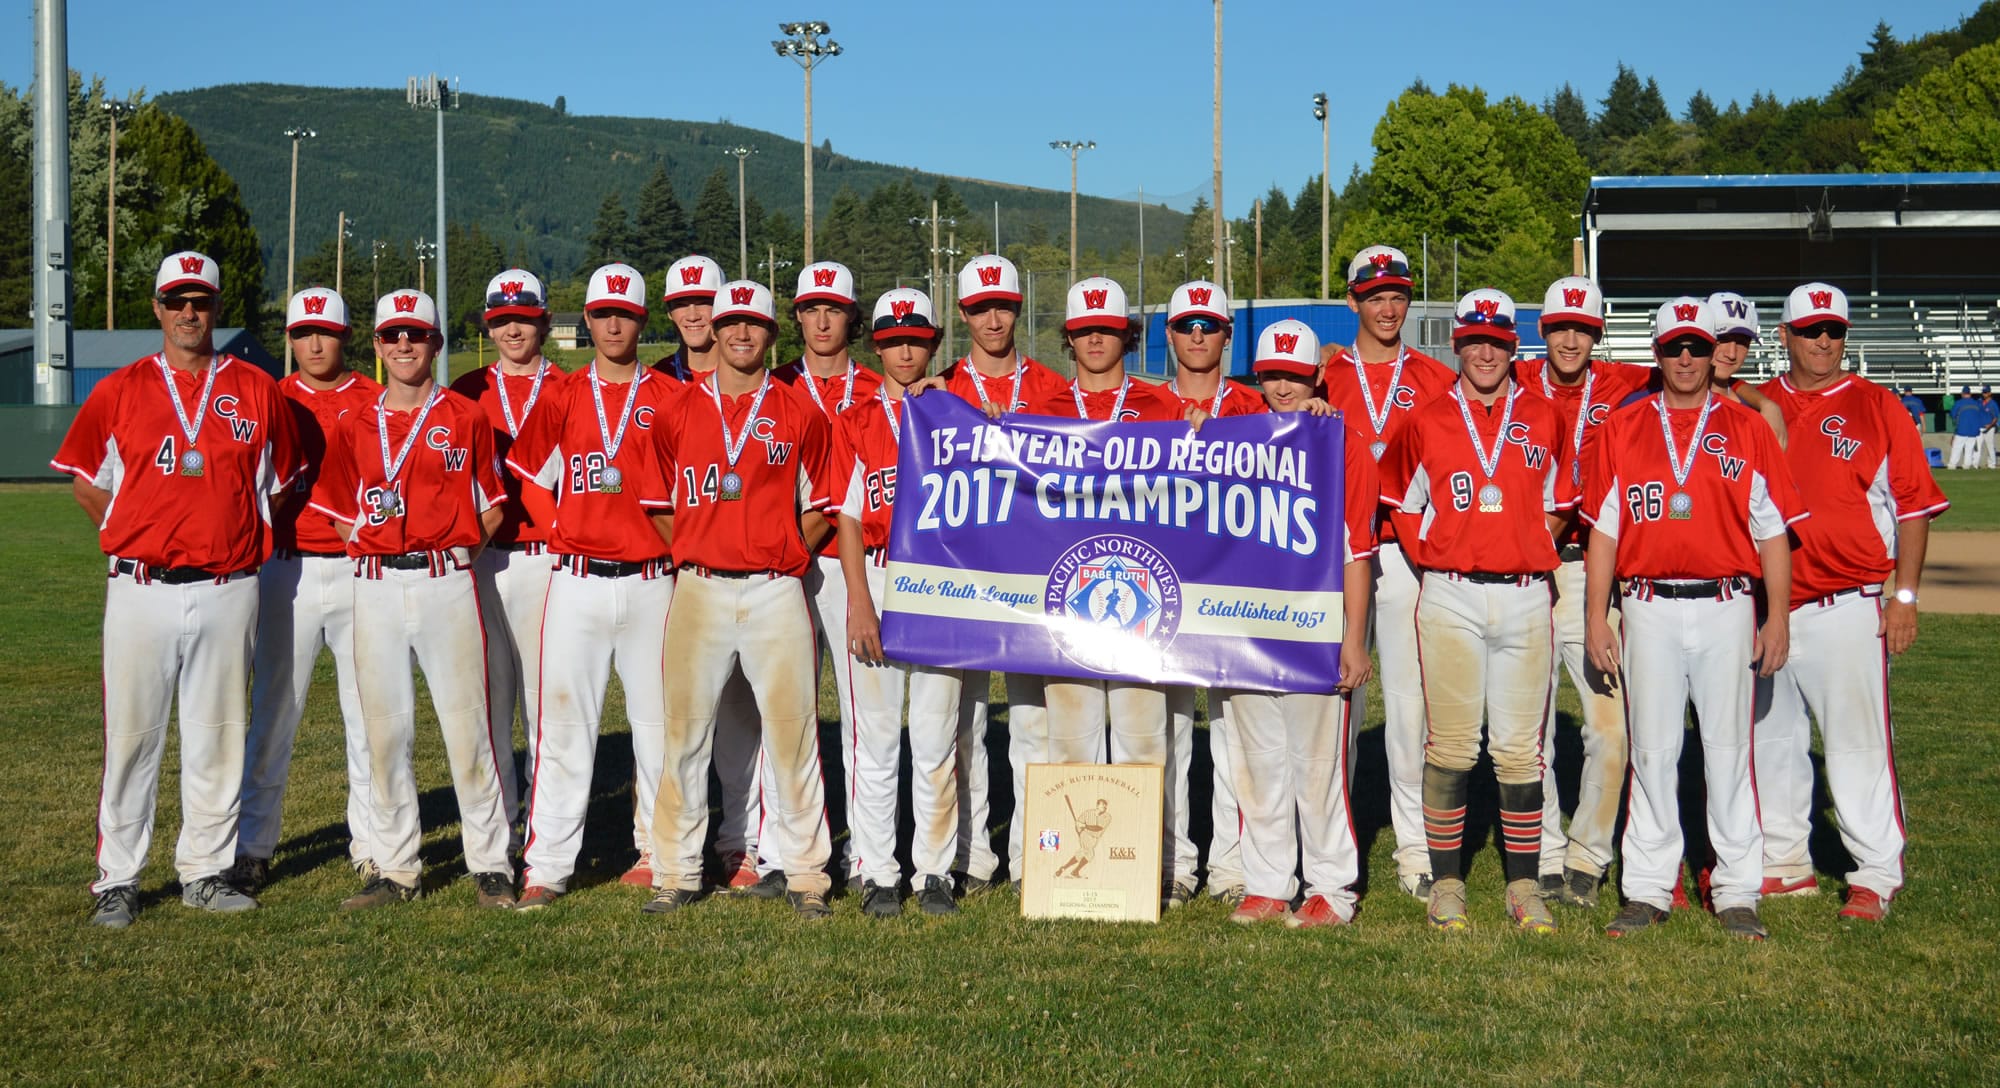 The Camas-Washougal Babe Ruth 13- to 15-year-old all-star team captured the Pacific Northwest Regional Championship Saturday, at Rister Stadium in Kelso. Players are Drew Ott, Lucas Barbier, Jackson Gibbs, Josh Mansur, Skylar Kelsey, Beau Kearsey, Taylor Shega, Clint French, Braden Zook, Evan Stott, Isaac Hanley, Kolby Broadbent, Bradley Carter, Logan Kearsey and Gideon Malychewski. Andrew Ott manages the team, and Bob Gibbs and Joel Shega are the coaches.